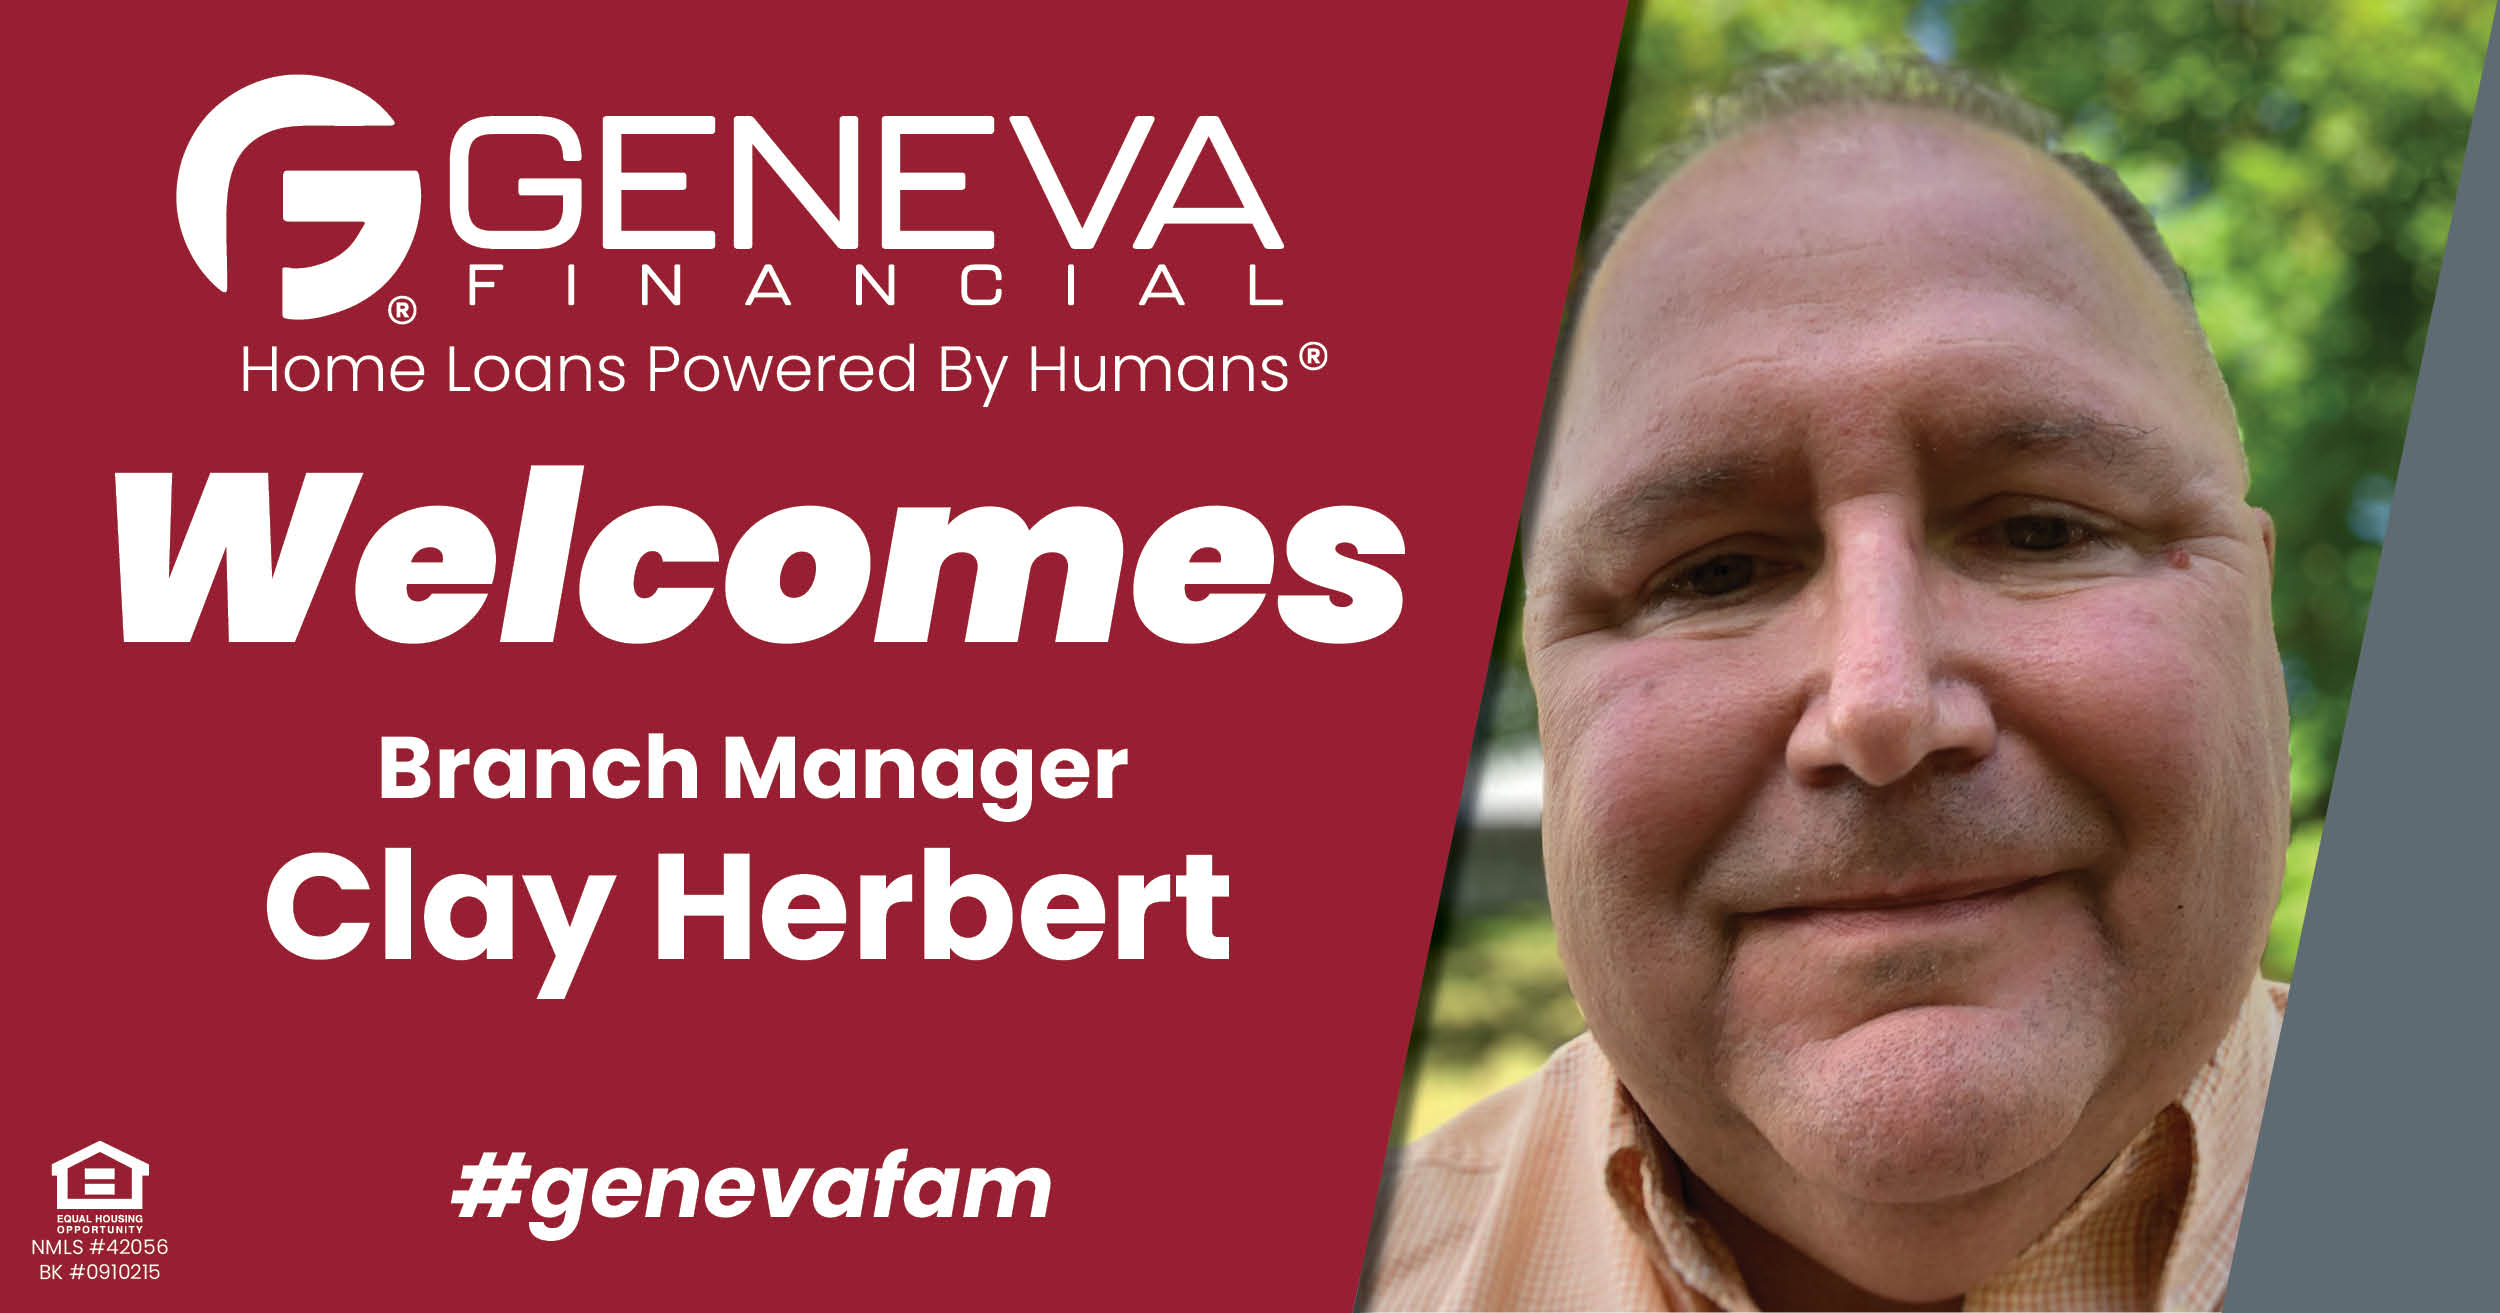 Geneva Financial Welcomes New Branch Manager Clay Herbert to Greenfield, Massachusetts – Home Loans Powered by Humans®.